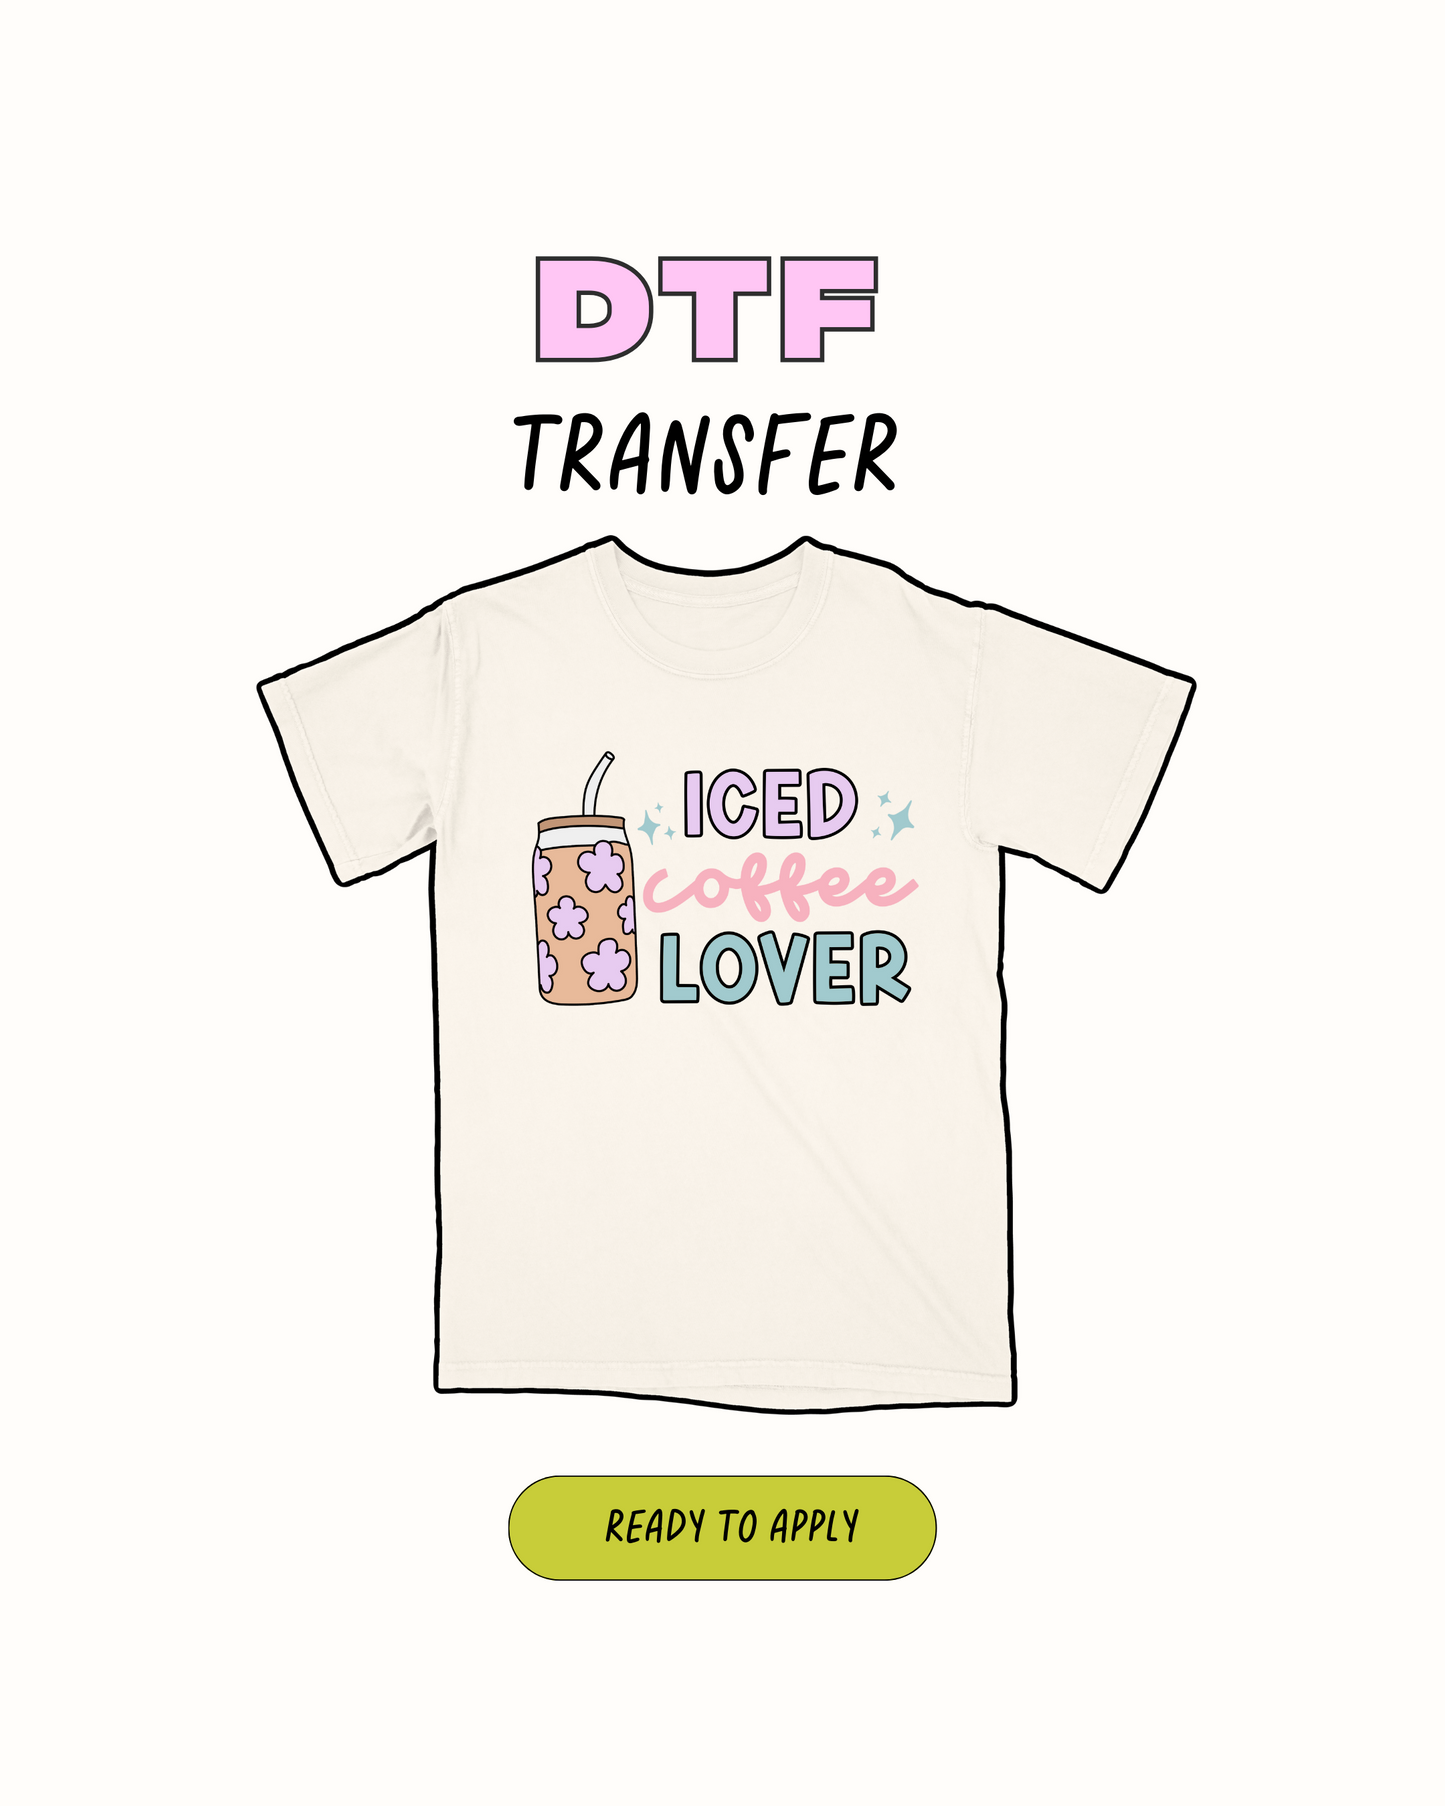 ICED COFFEE LOVER - DTF Transfer